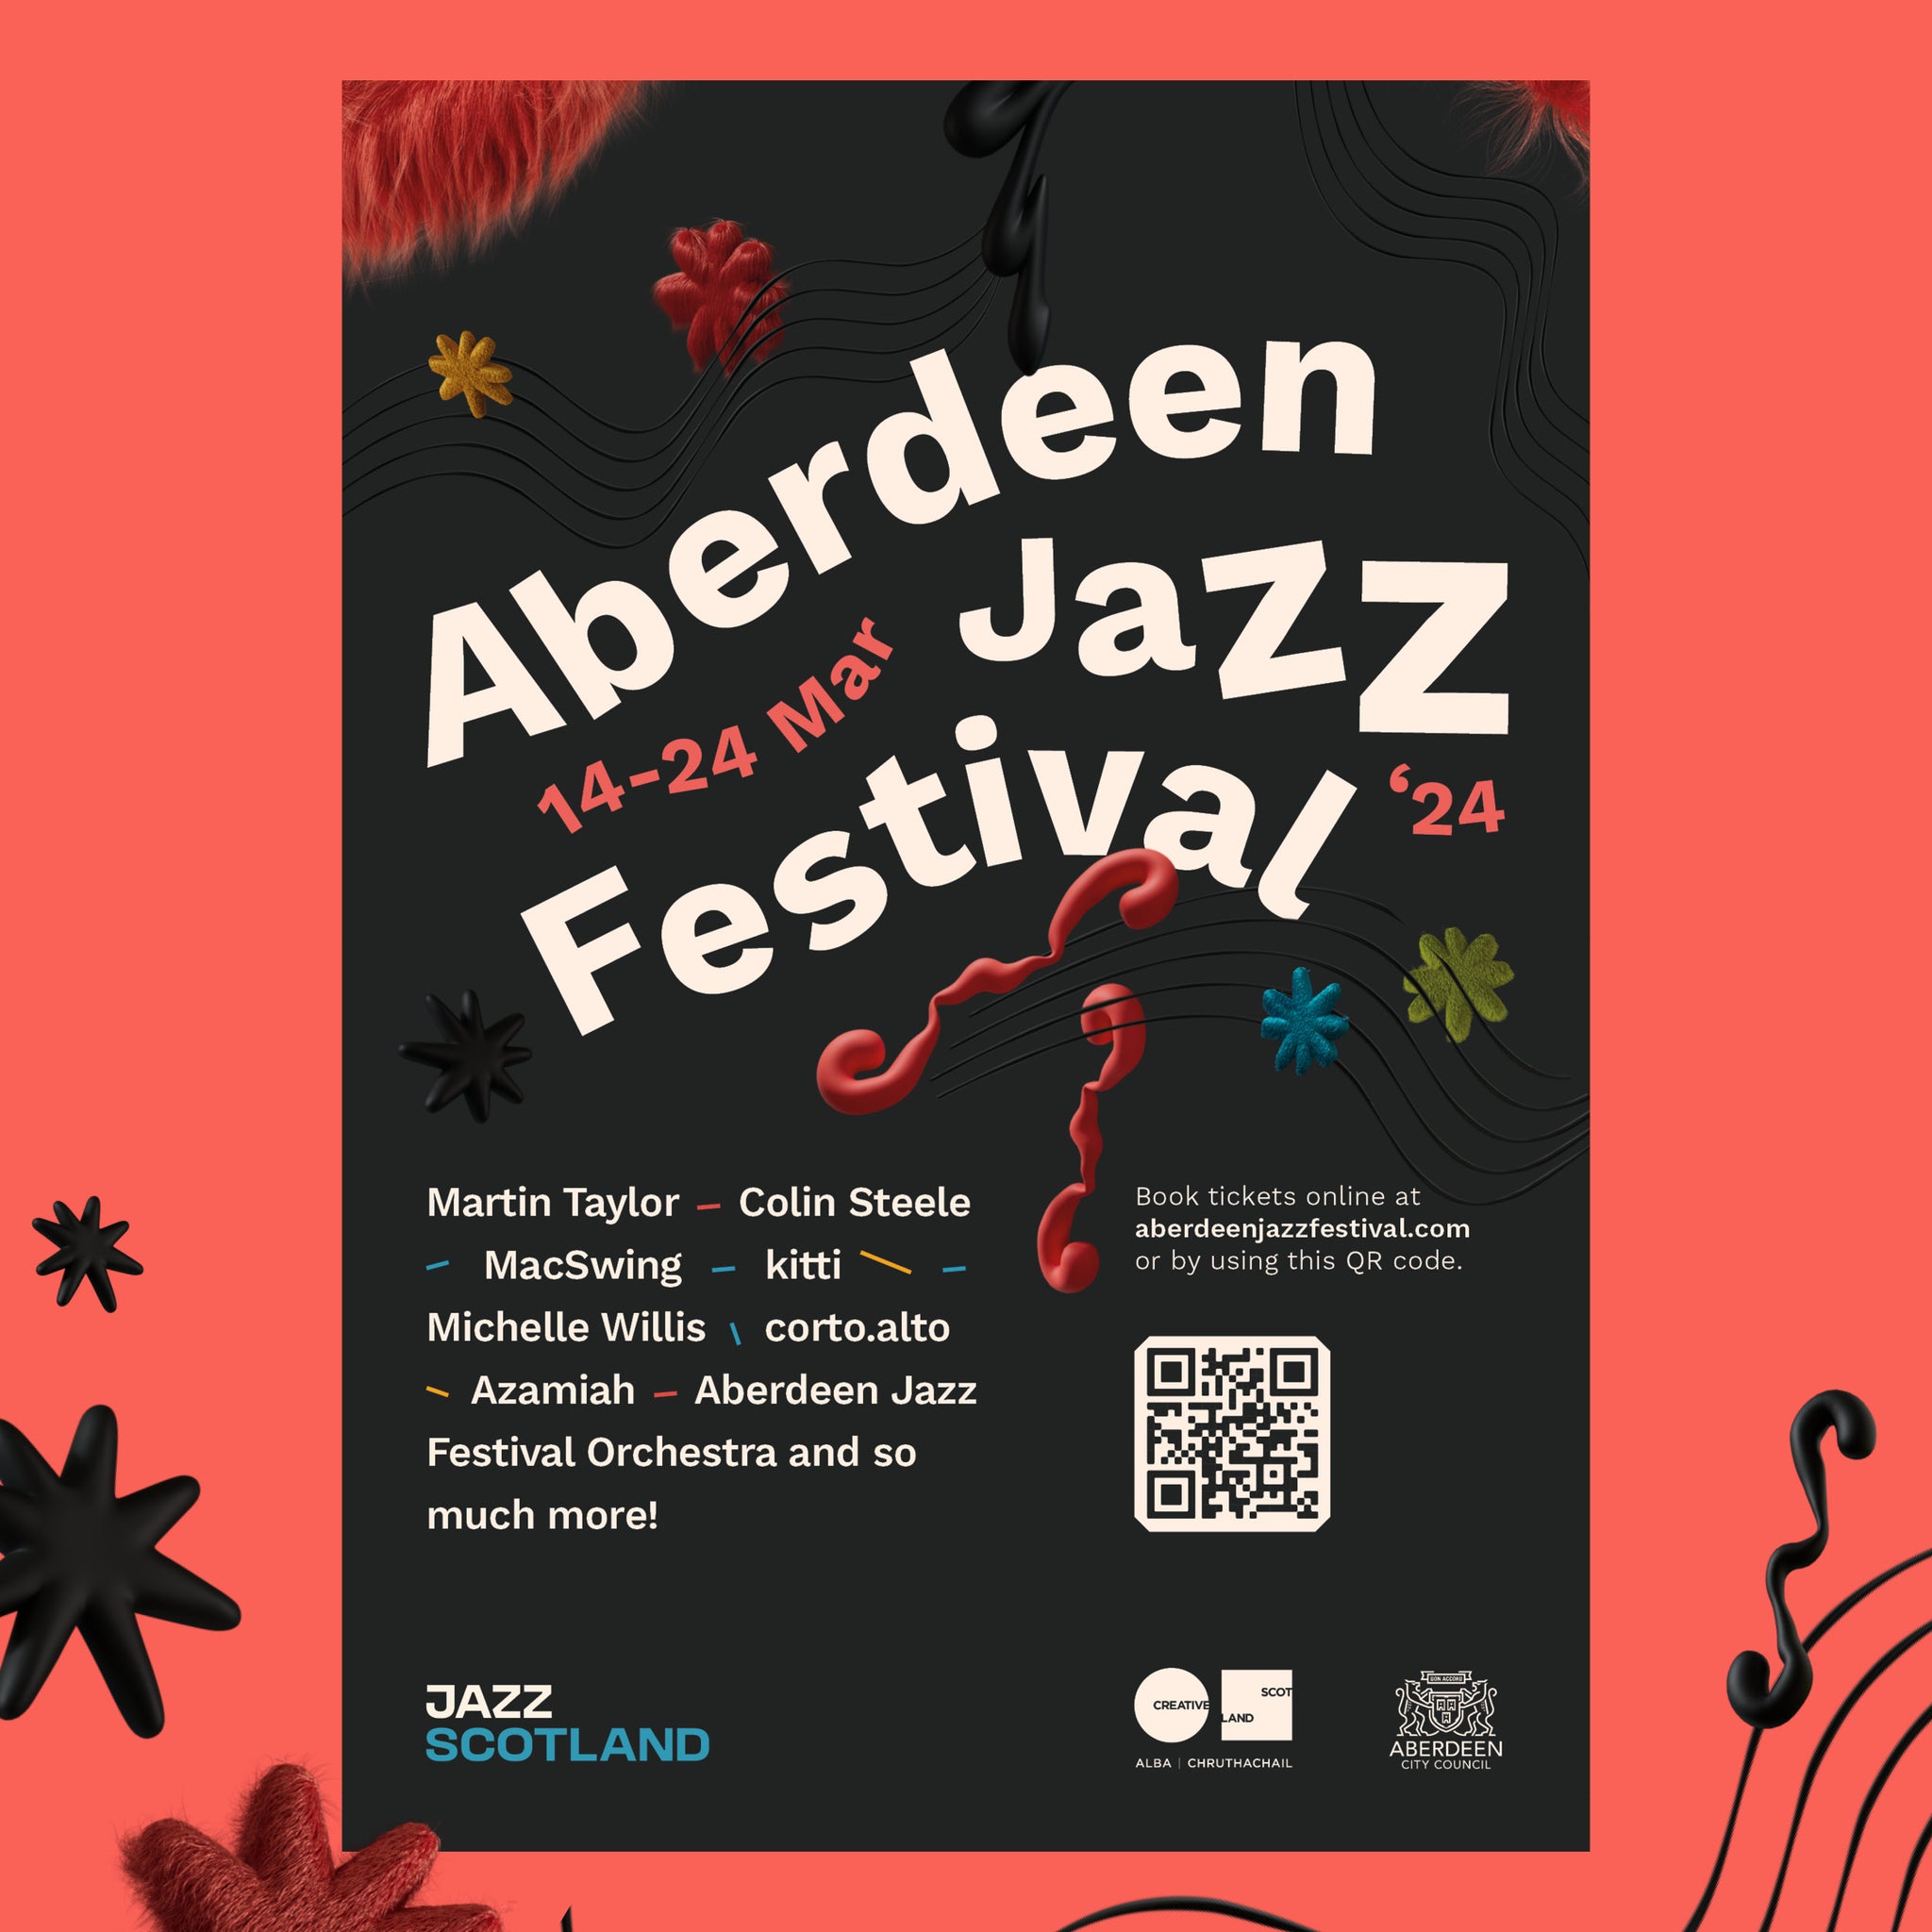 Aberdeen Jazz Festival: This City is Going to Make Some Noise!